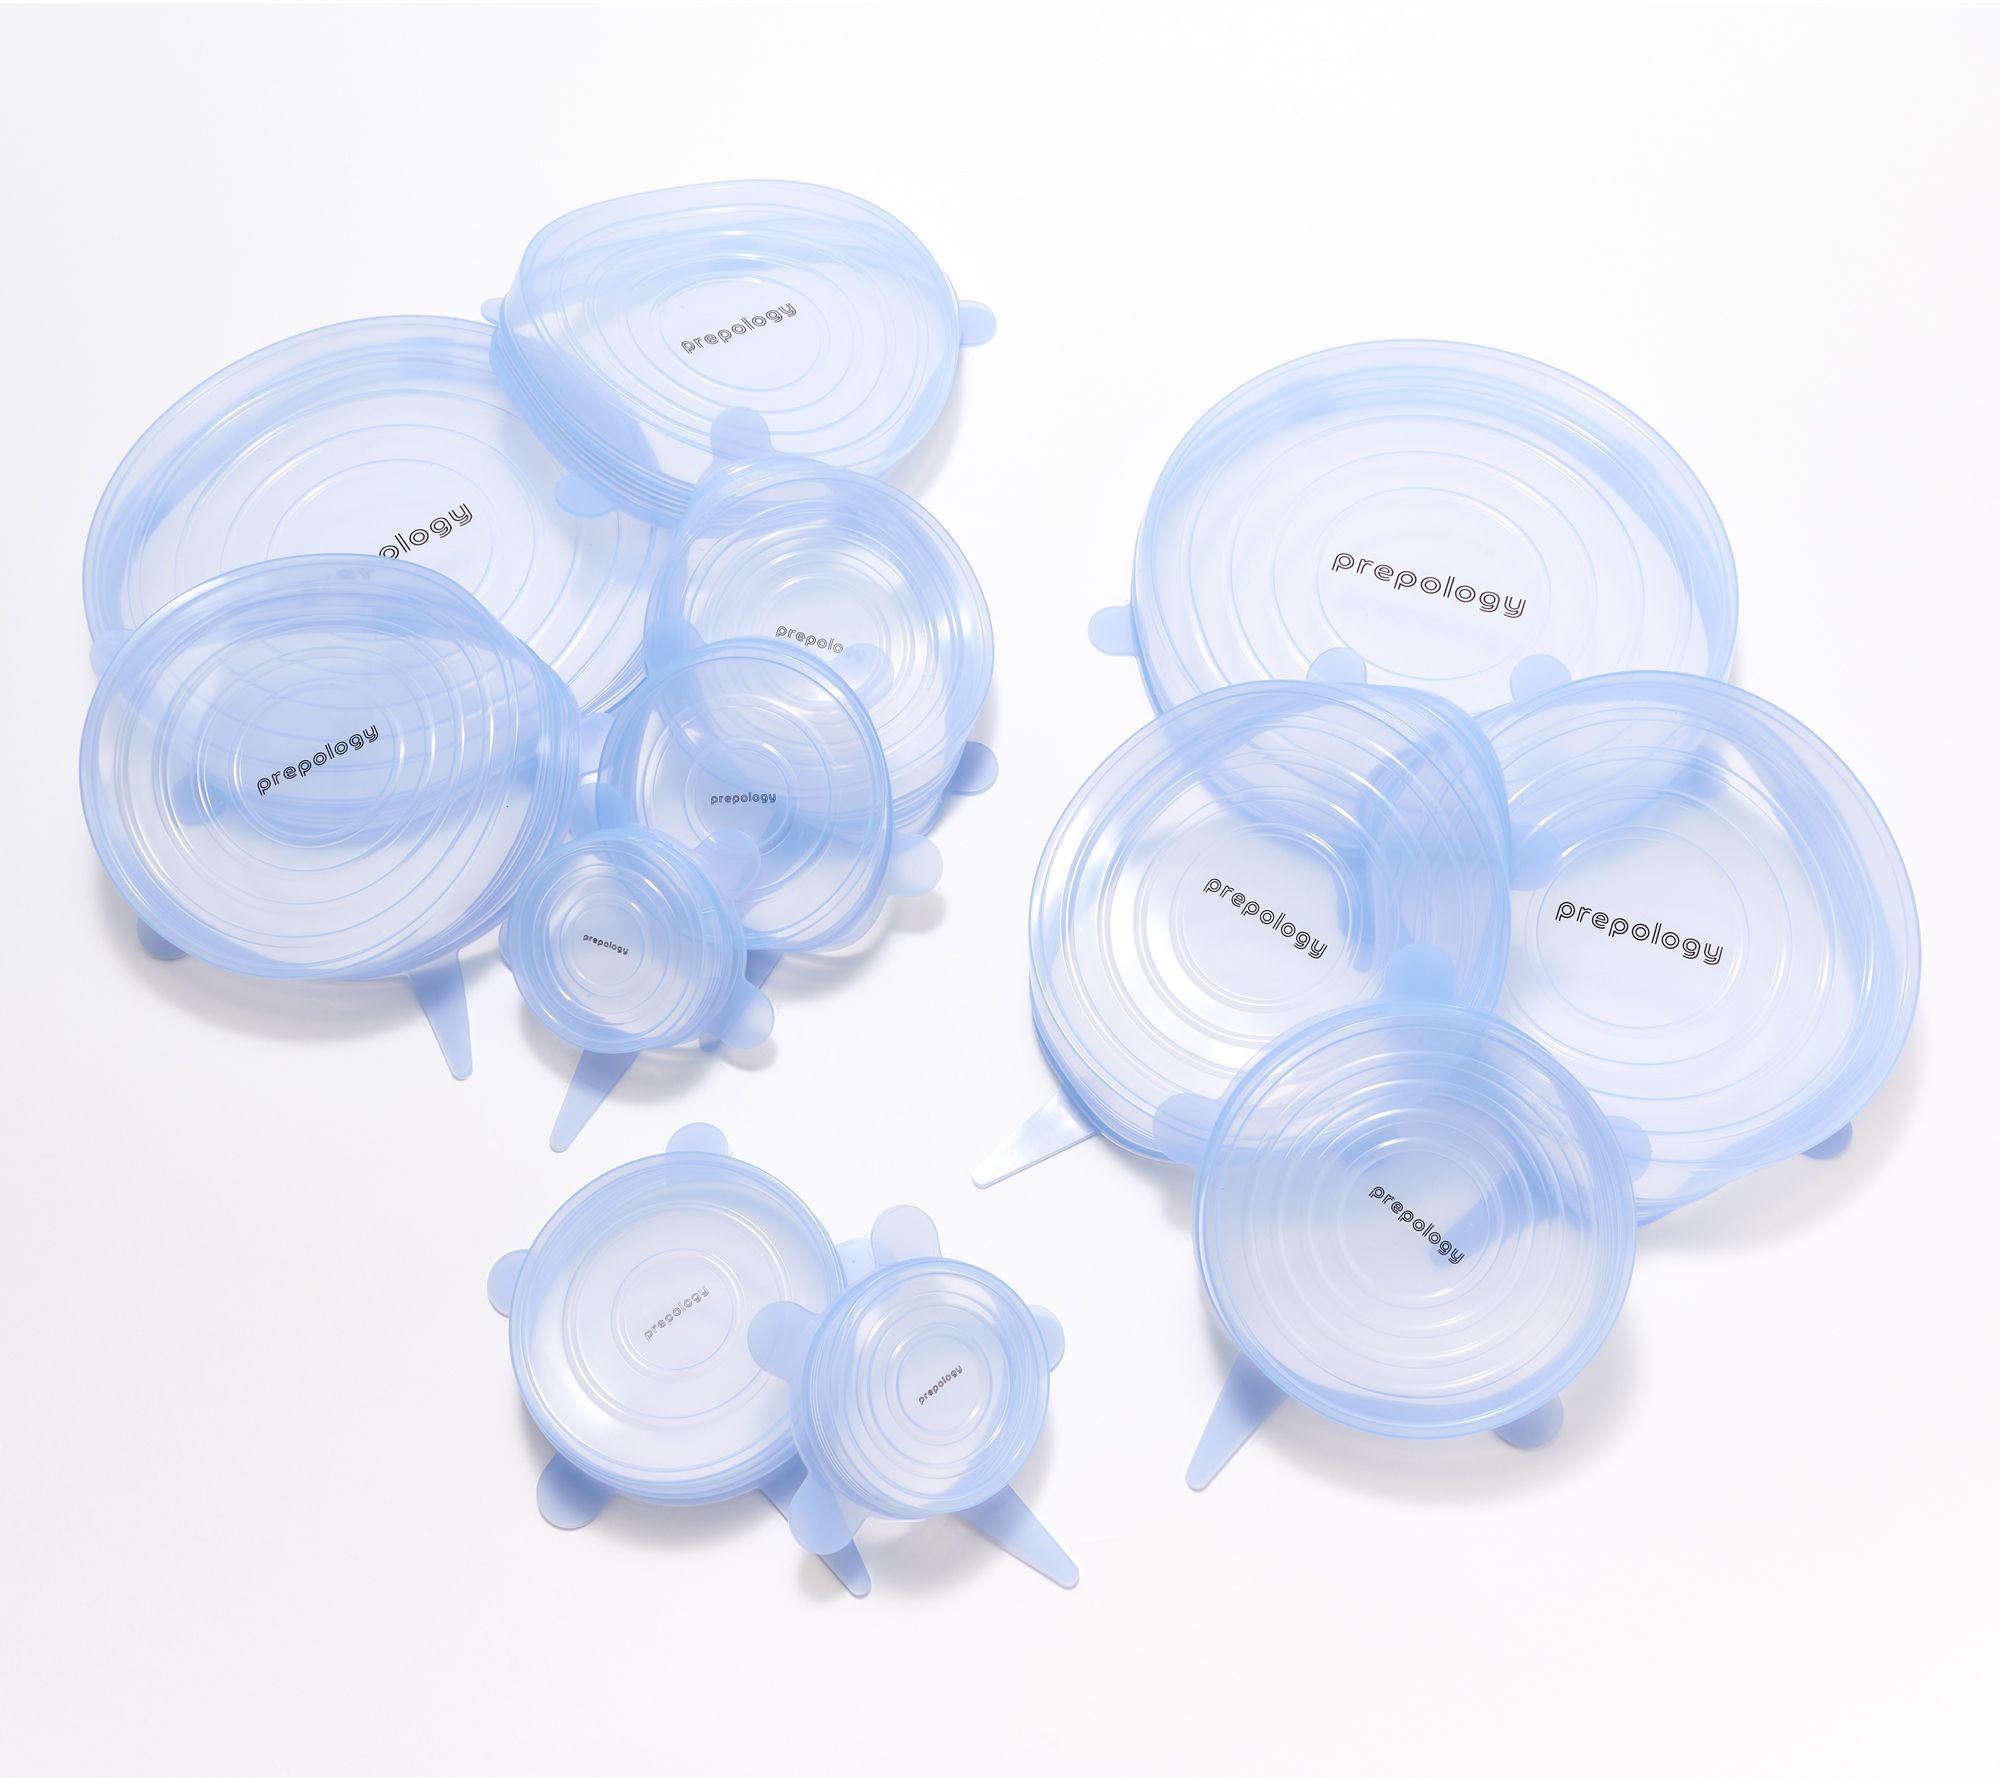 Prepology 3-Piece Silicone Suction Lids 